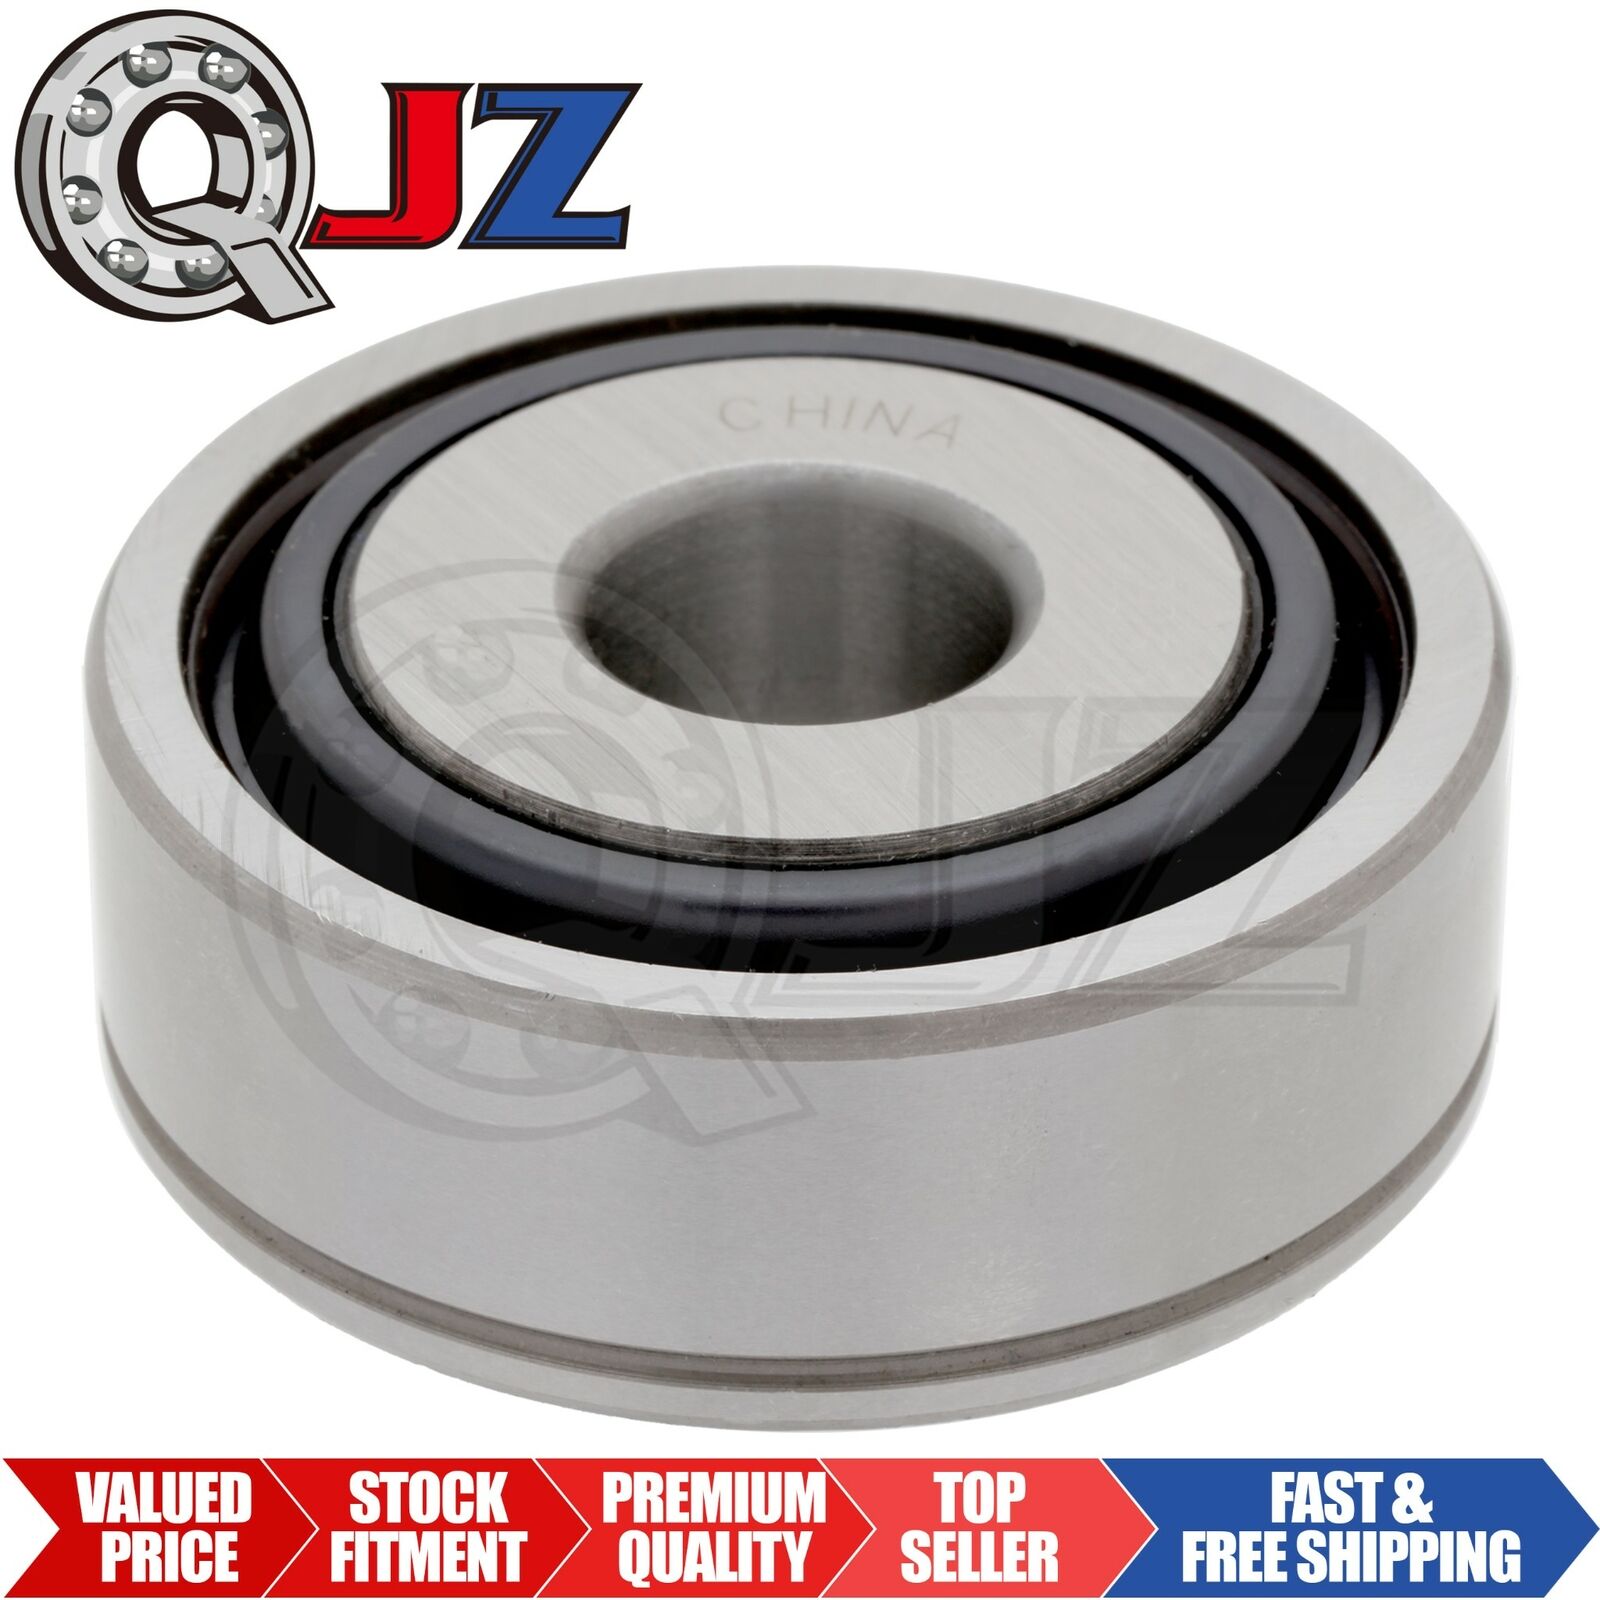 [Qty.1] New 205DDS-5/8 Special Ag Insert Ball Bearing [5/8in Bore x 2.087in OD]